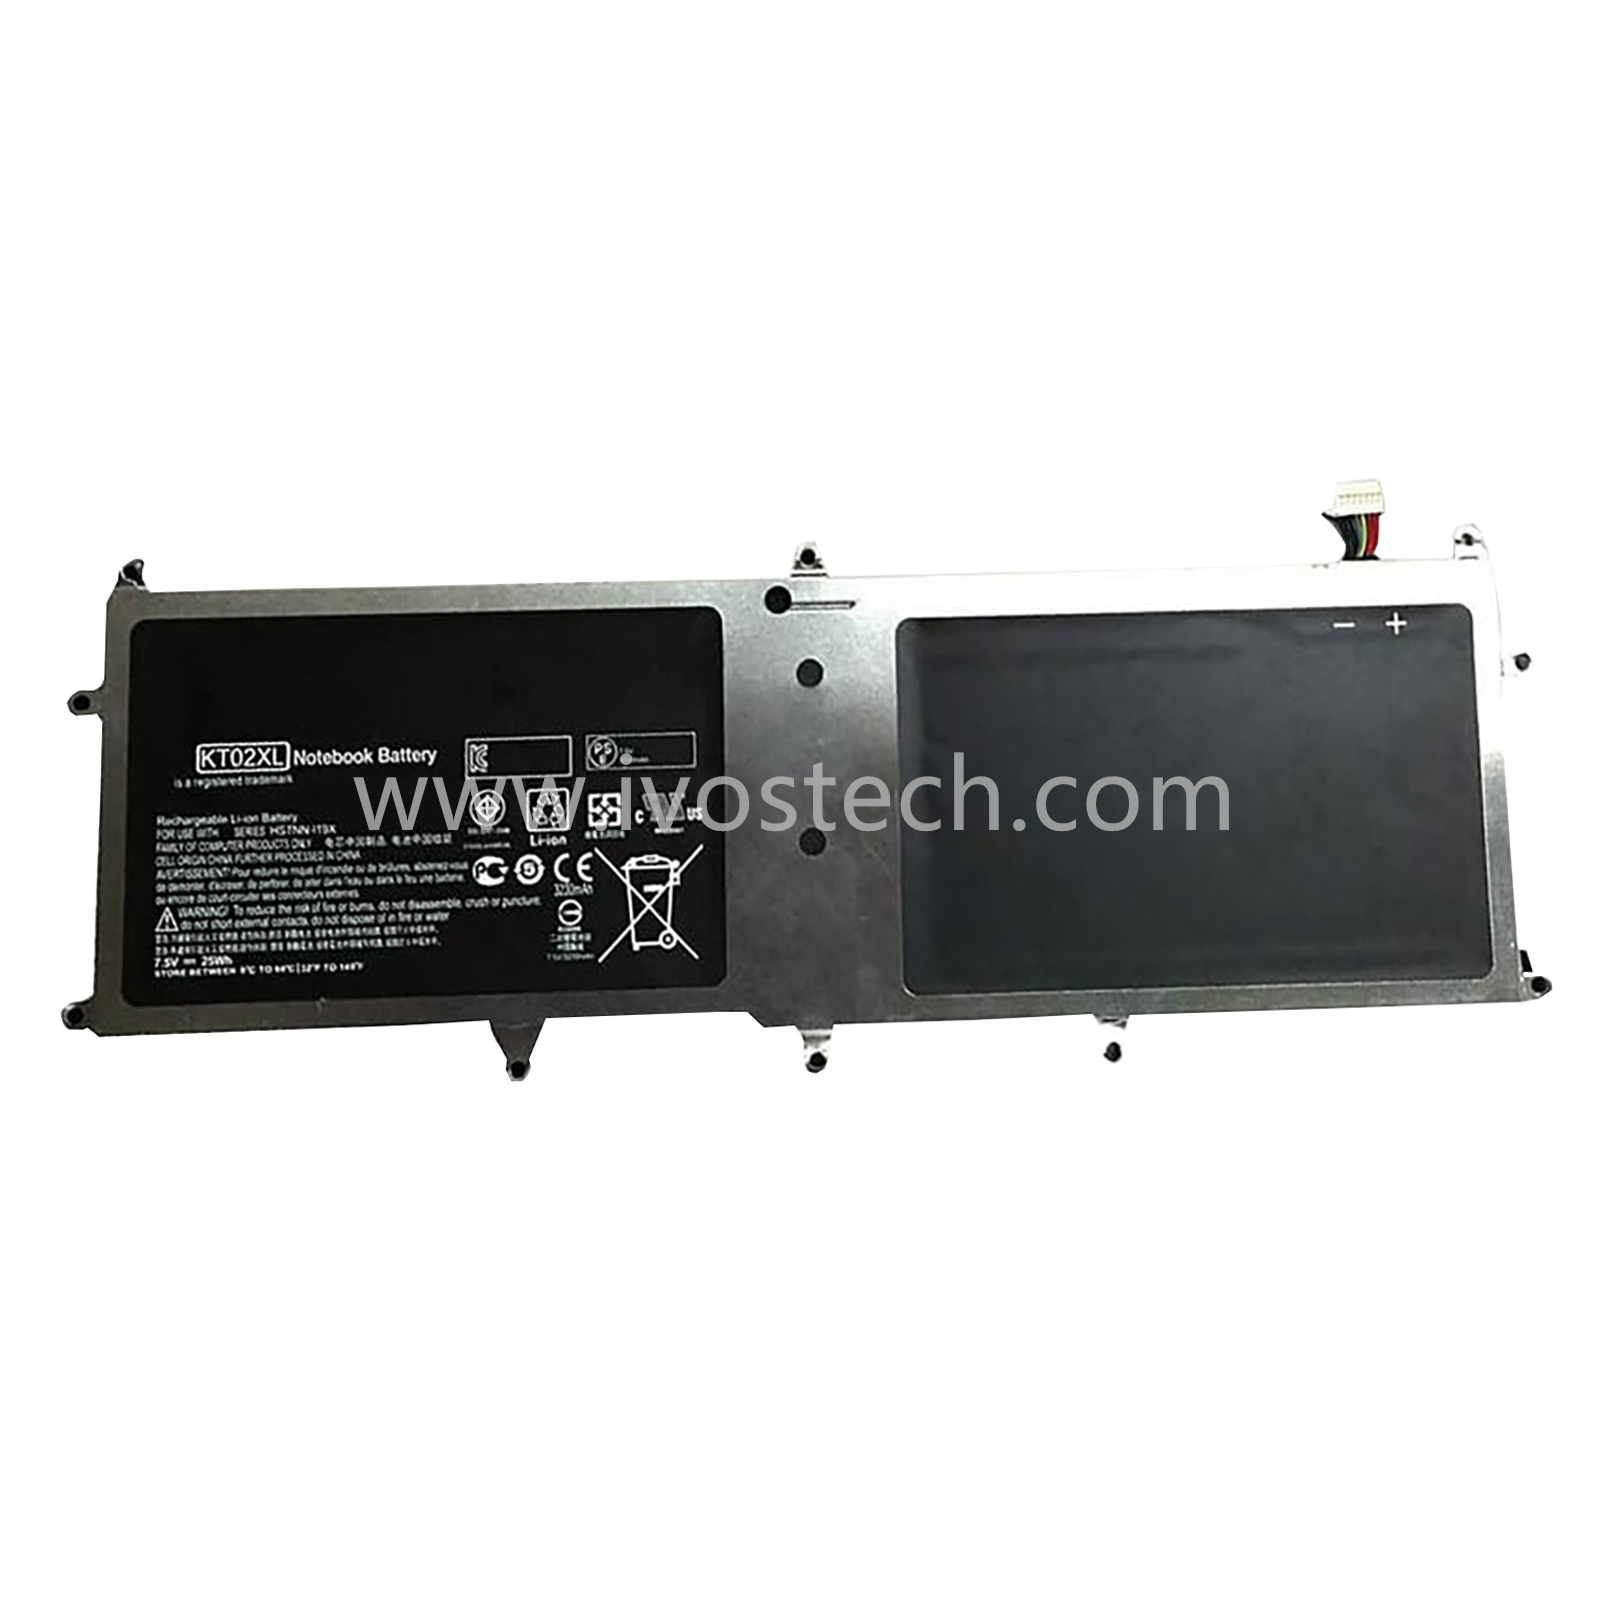 KT02XL 25Wh 7.4V Replacement Laptop Battery for HP Pro X2 612 G1 Tablet Series